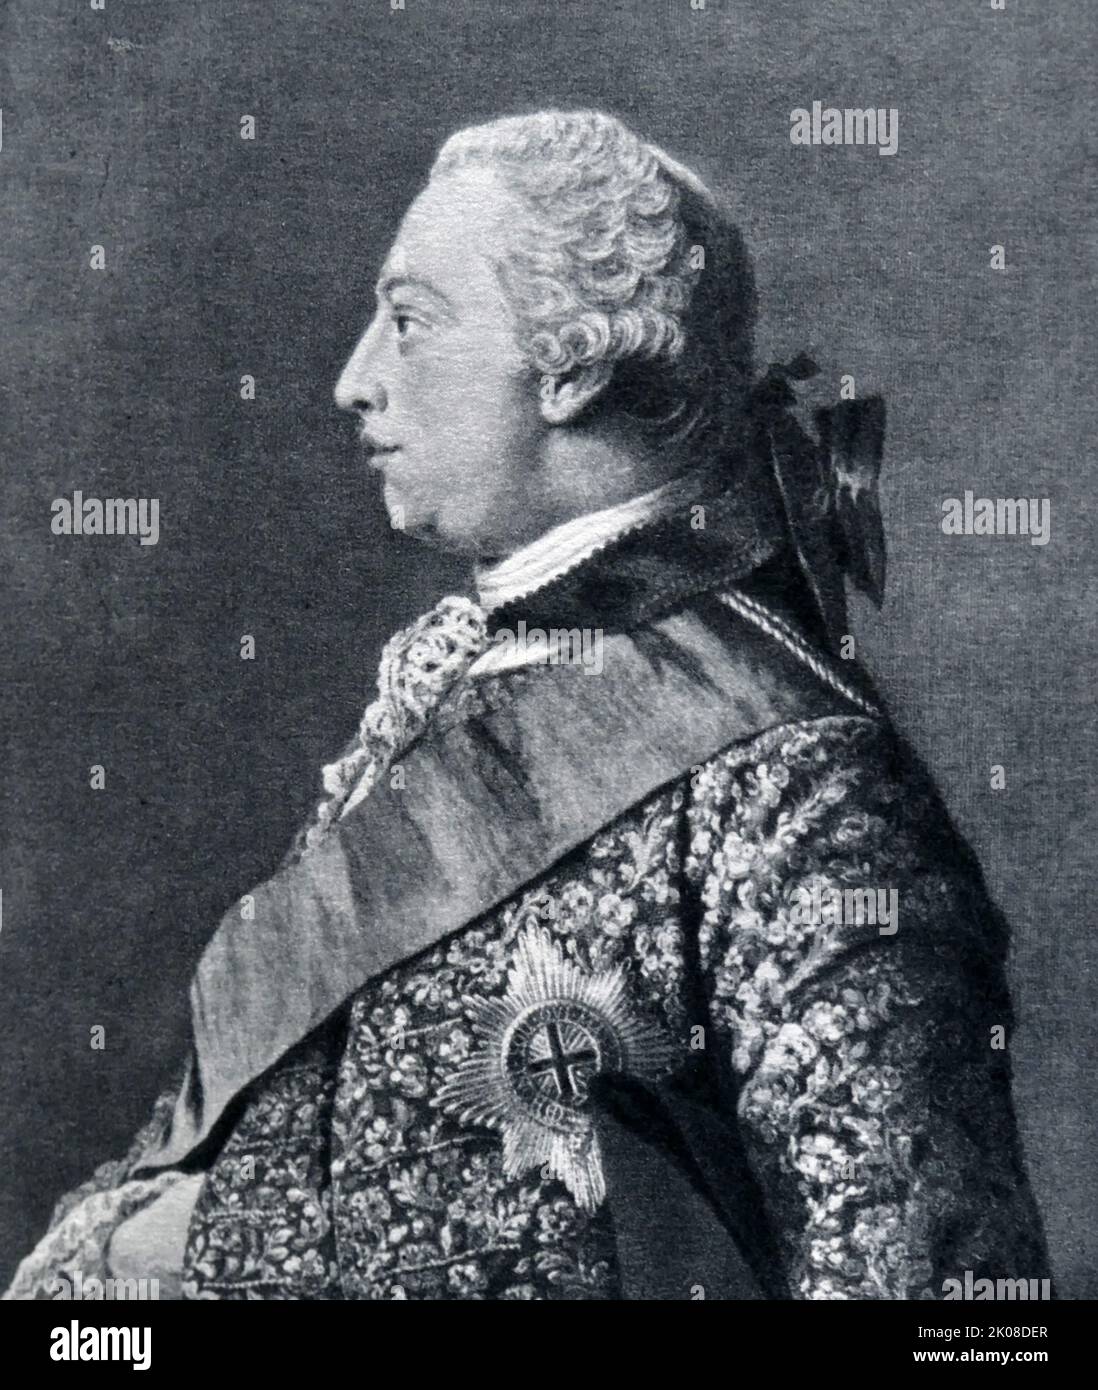 George III, King of England, by Allan Ramsay (13 October 1713 - 10 August 1784) was a prominent Scottish portrait-painter. George III (George William Frederick; 4 June 1738 - 29 January 1820) was King of Great Britain and of Ireland from 25 October 1760 until the union of the two kingdoms on 1 January 1801, after which he was King of the United Kingdom of Great Britain and Ireland until his death in 1820 Stock Photo